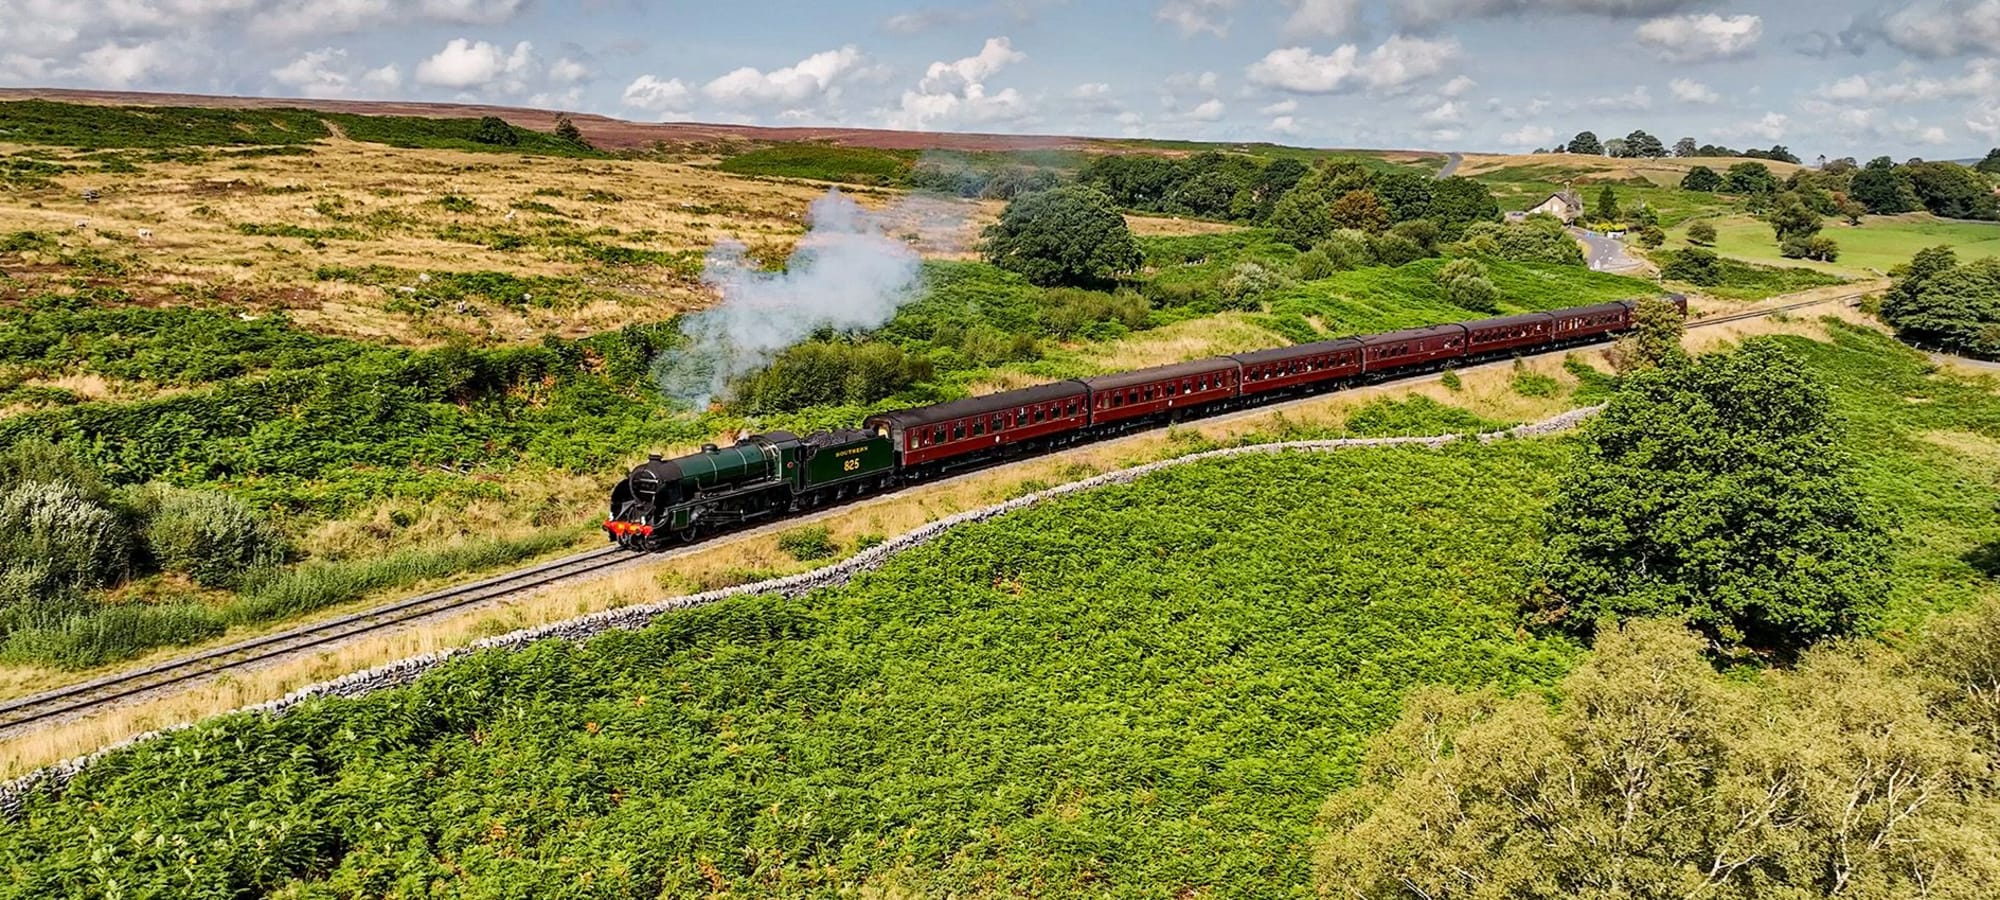 North Yorkshire Moors Railway and Whitby